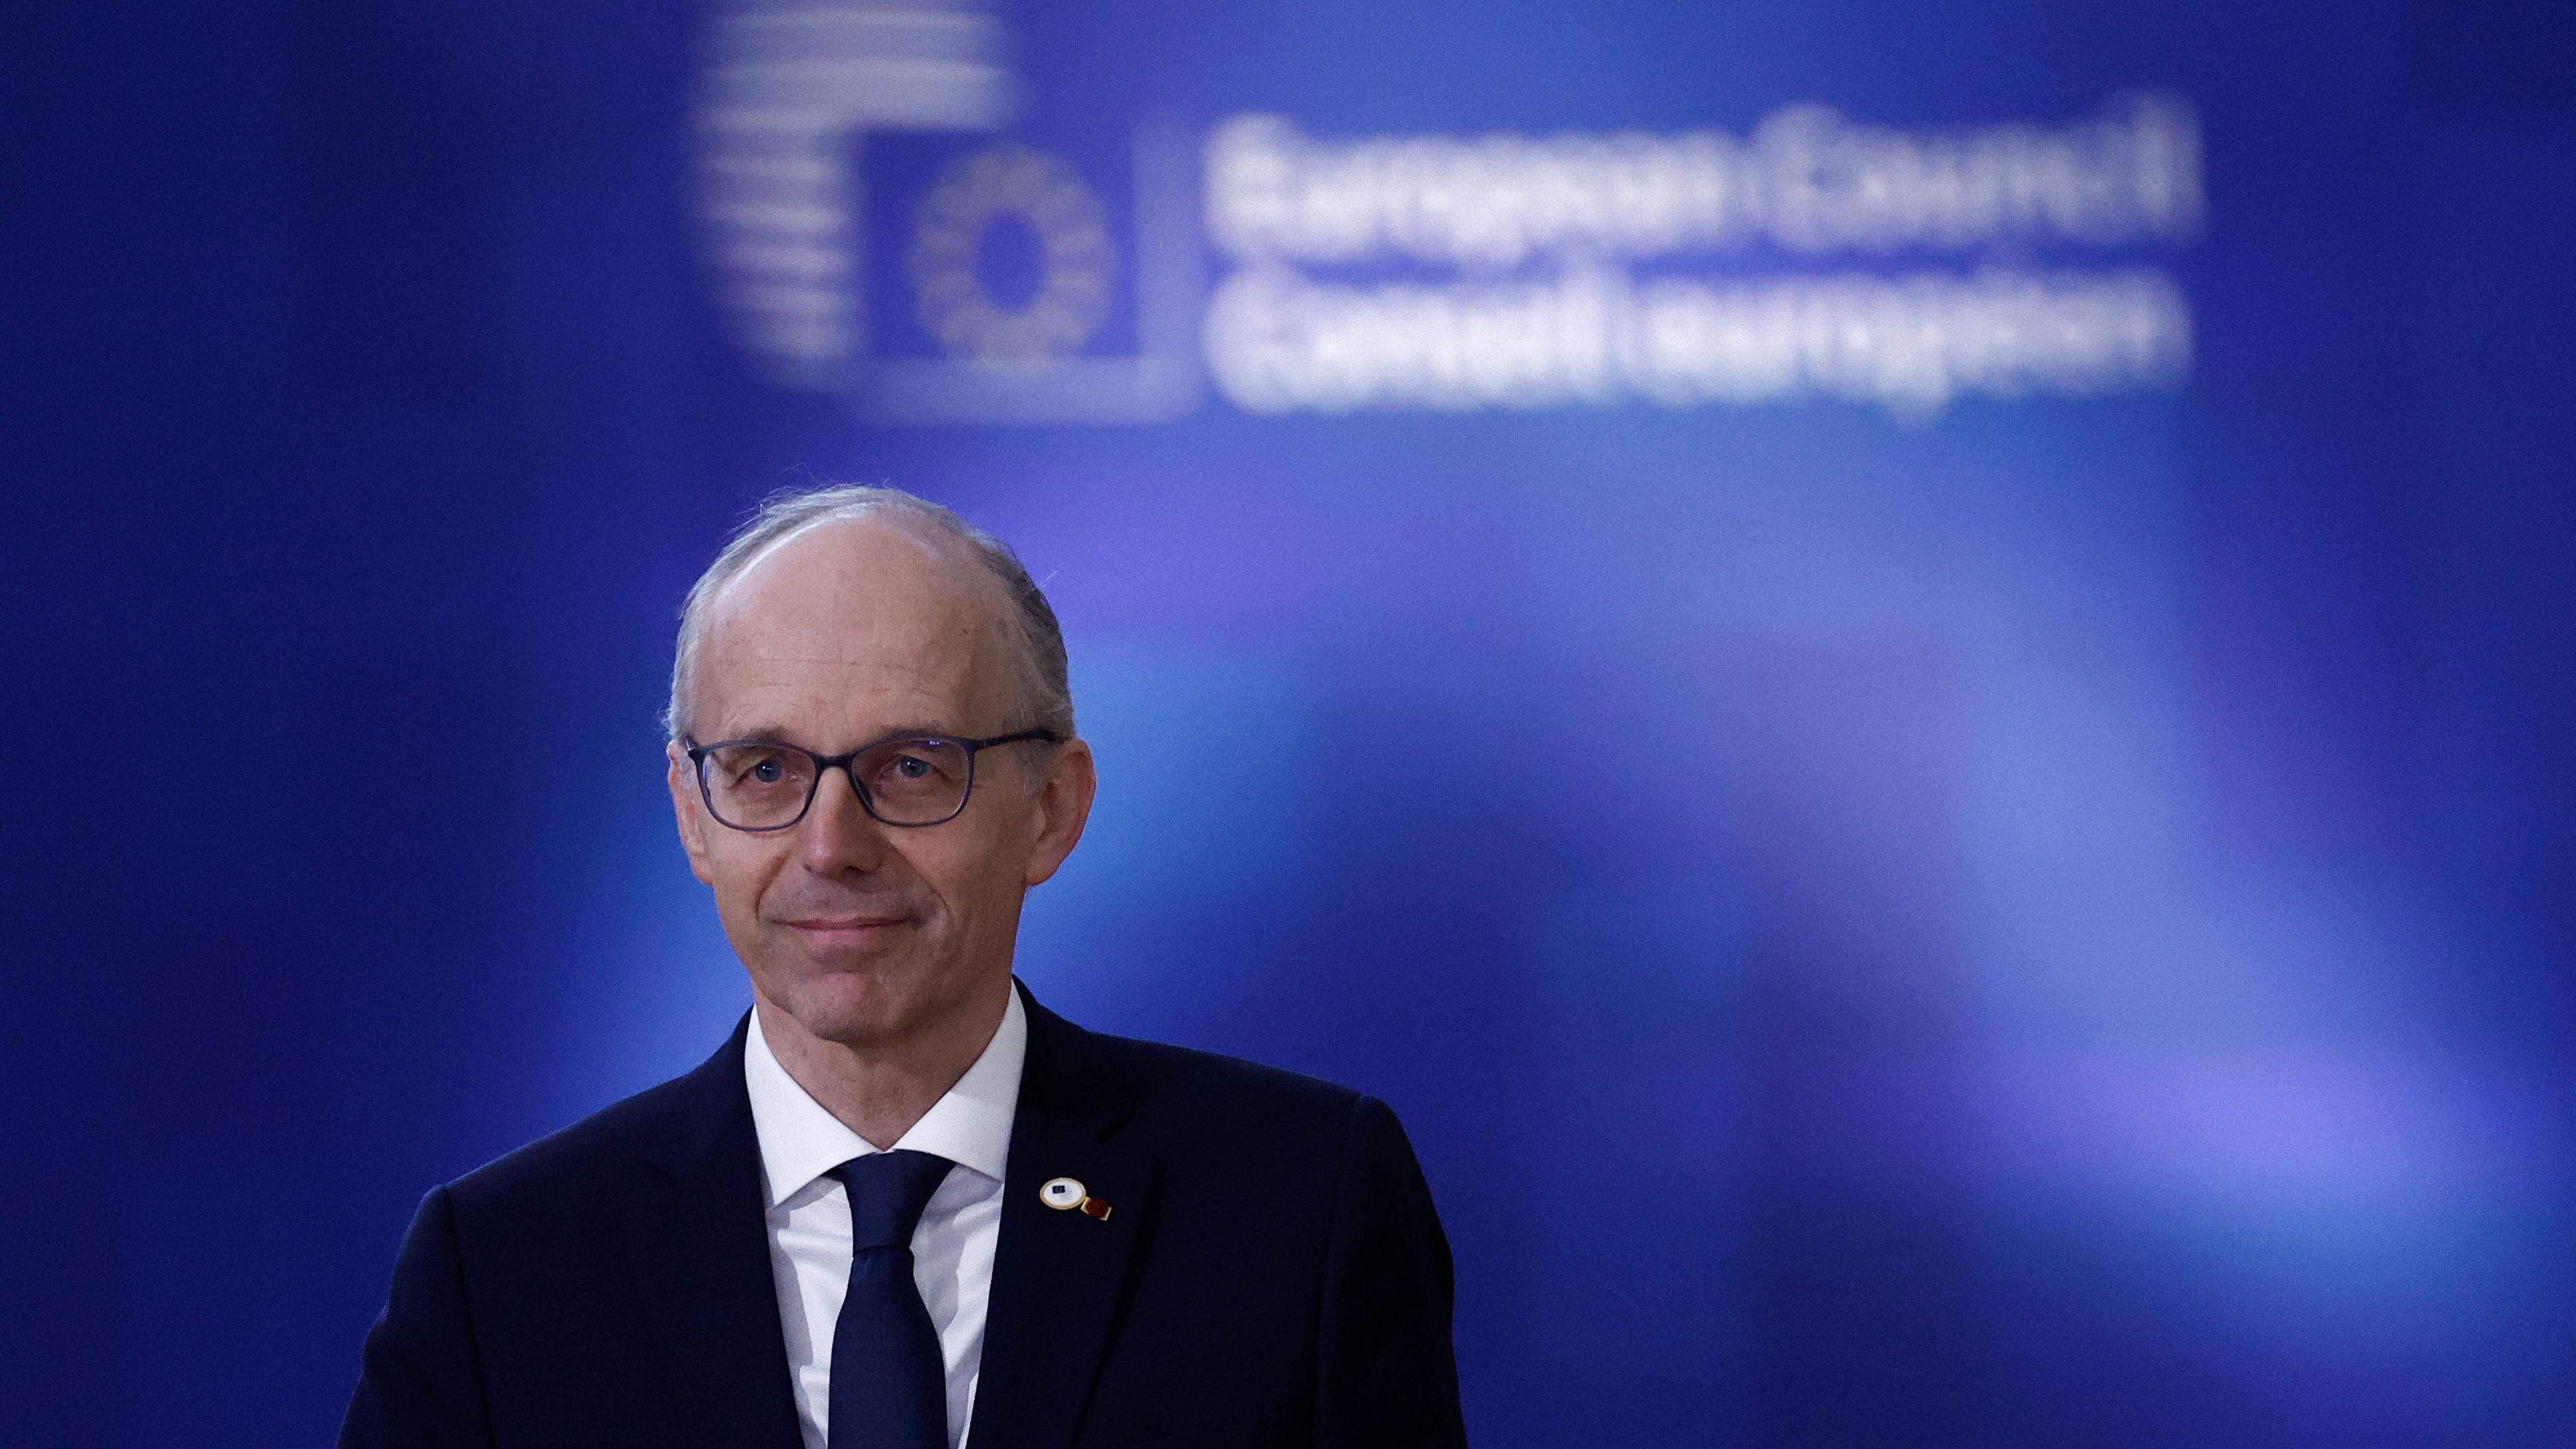 Luxembourg's Prime Minister Luc Frieden arrives for a special European Council at the EU headquarters in Brussels on April 17